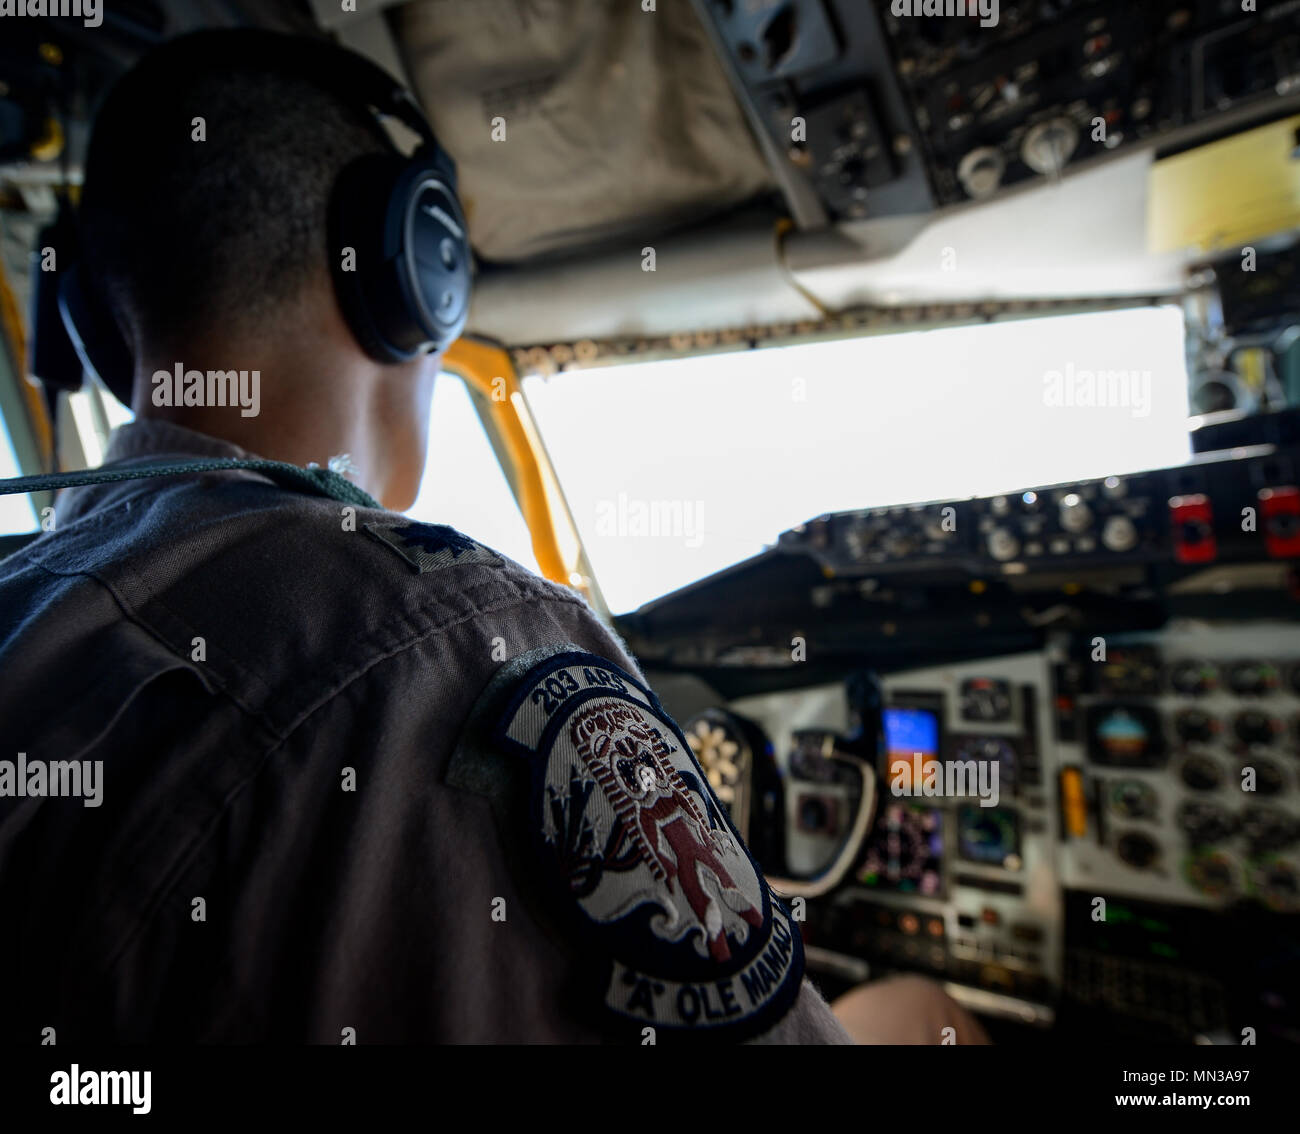 A military patch adorns the uniform of a KC-135 Stratotanker pilot during a flight in support of Operation Inherent Resolve Aug. 28, 2017. Despite being in the Air Force inventory for more than 50 years, B-52s can drop precision-guided weapons. The aircraft's payload capacity of 70,000 pounds can include gravity bombs, cluster bombs, precision-guided missiles and Joint Direct Attack Munitions. (U.S. Air Force photo by Staff Sgt. Michael Battles) Stock Photo